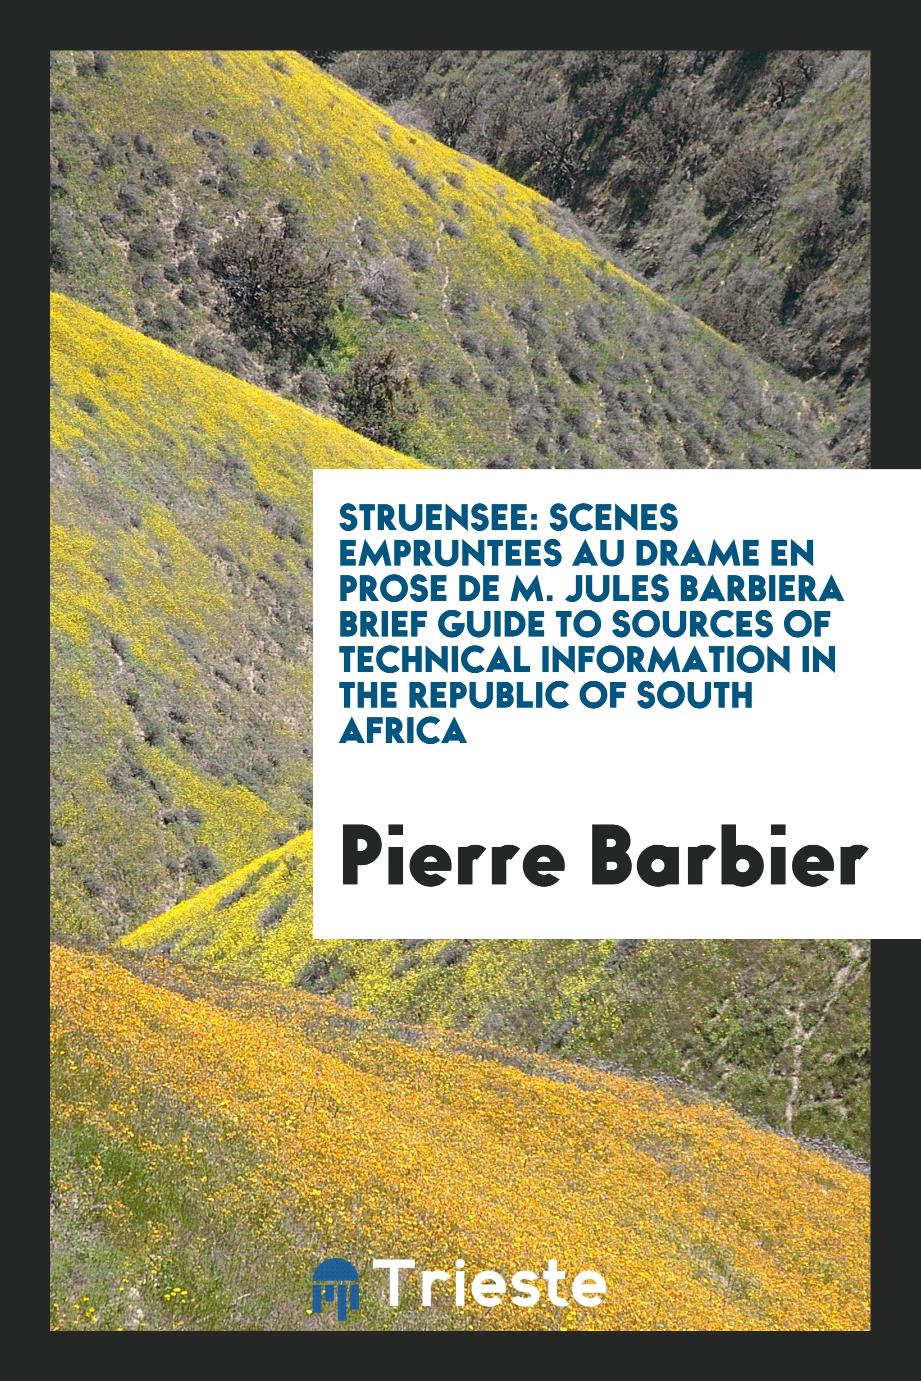 Struensee: scenes empruntees au drame en prose de M. Jules BarbierA Brief guide to sources of technical information in the Republic of South Africa